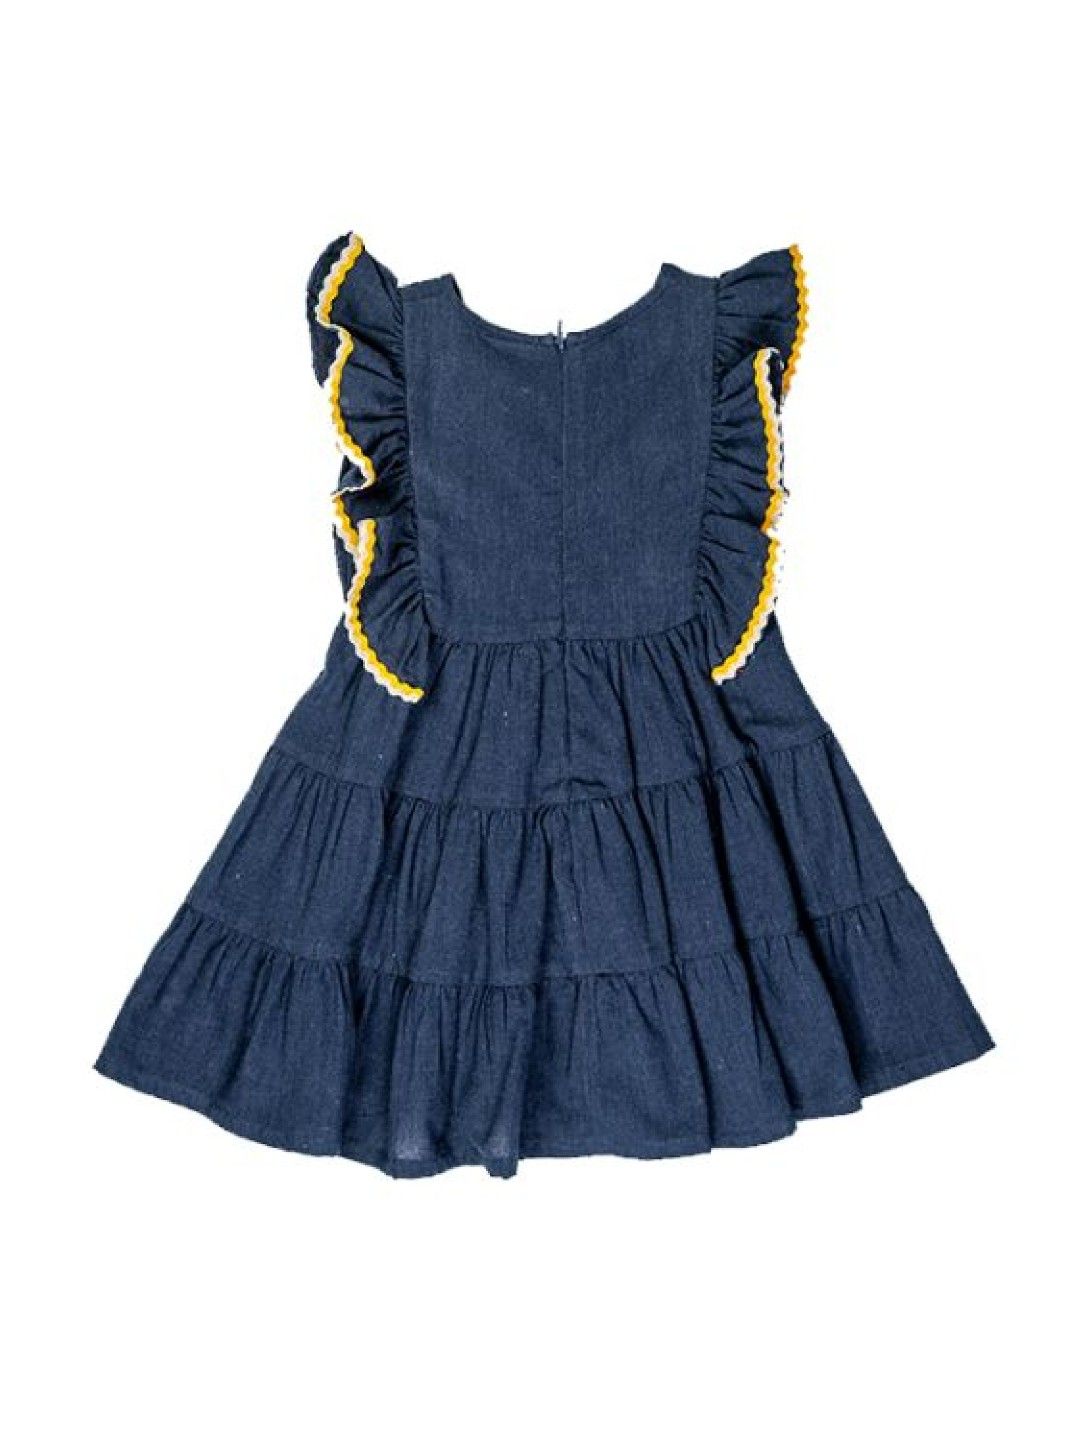 bean fashion Floral Flair Camia Ricrac Sleeve Embroidered Tiered Dress and Hat (Navy- Image 3)